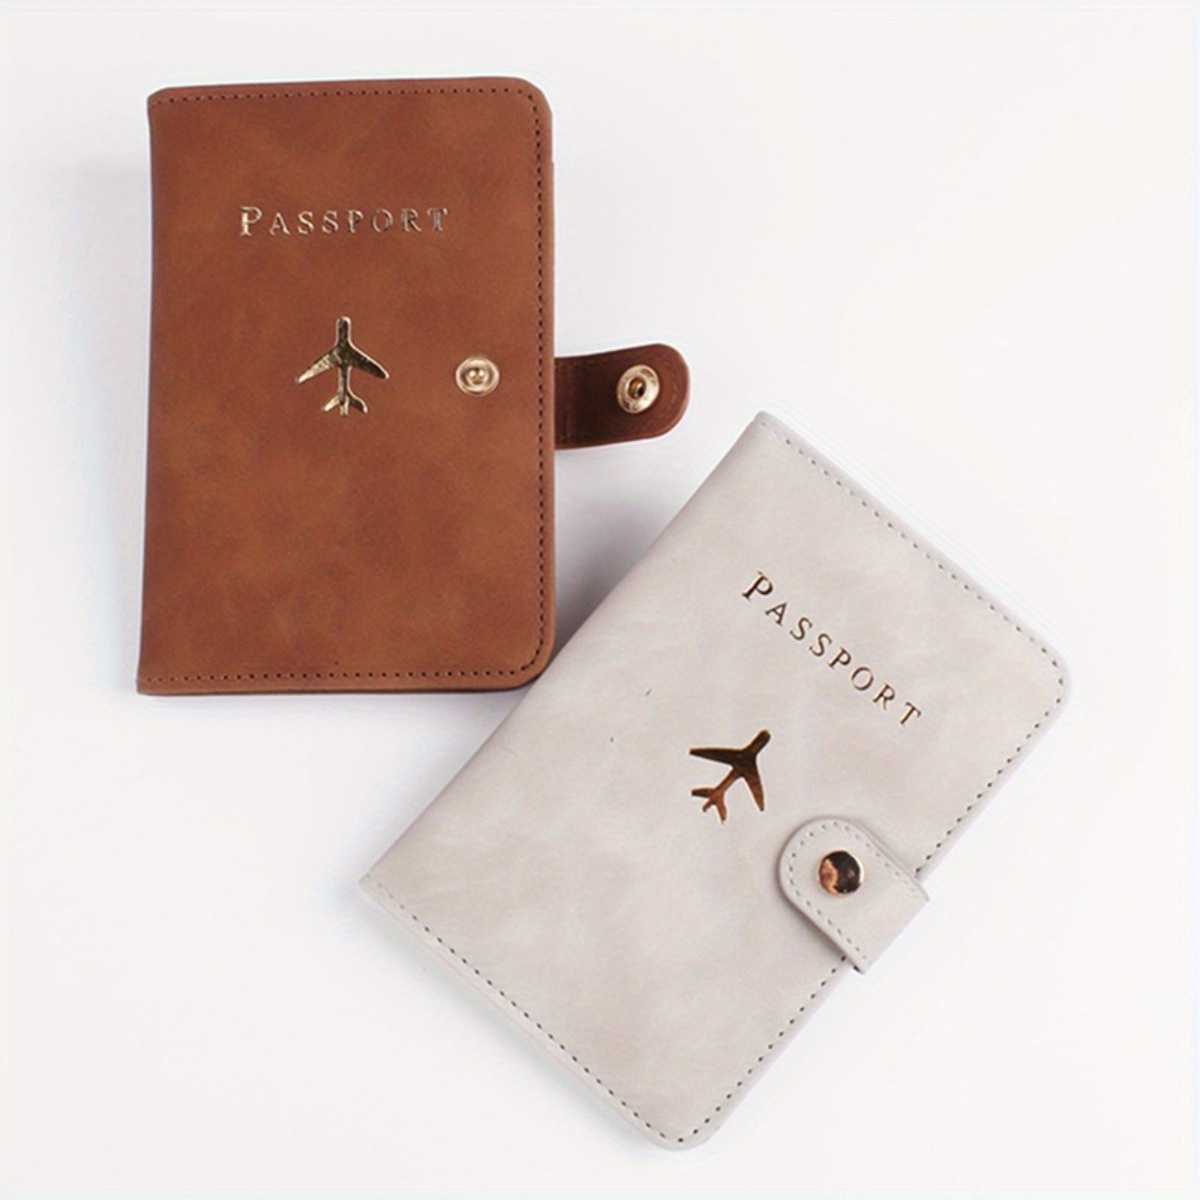 

Passport Cover Passport Protector Passport Holder With Card Slots For International Travel